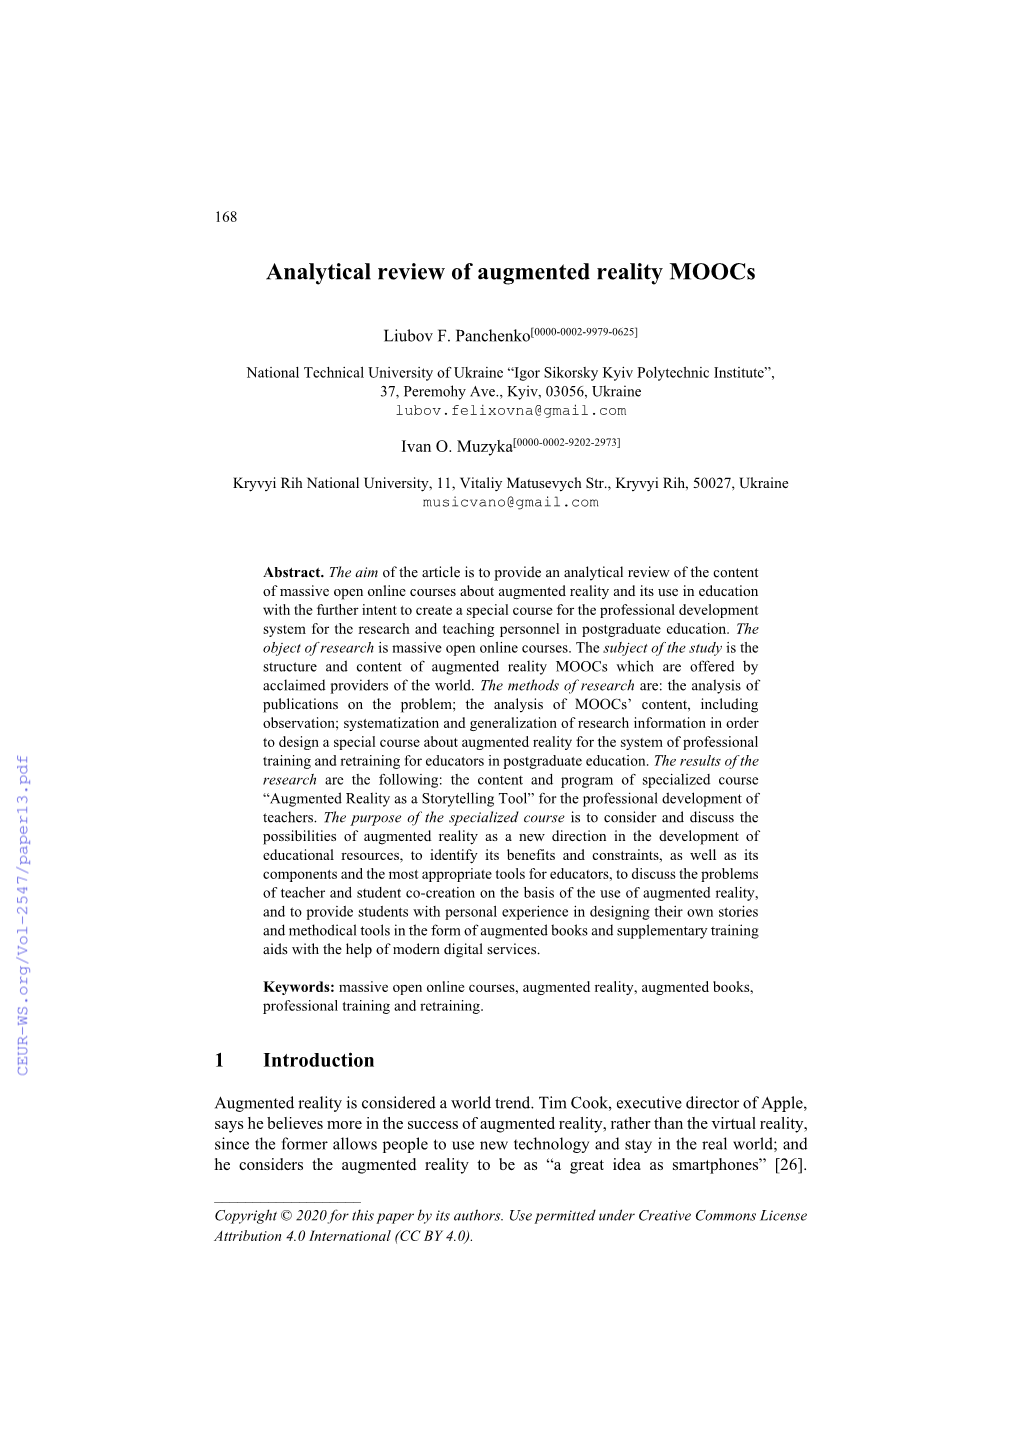 Analytical Review of Augmented Reality Moocs